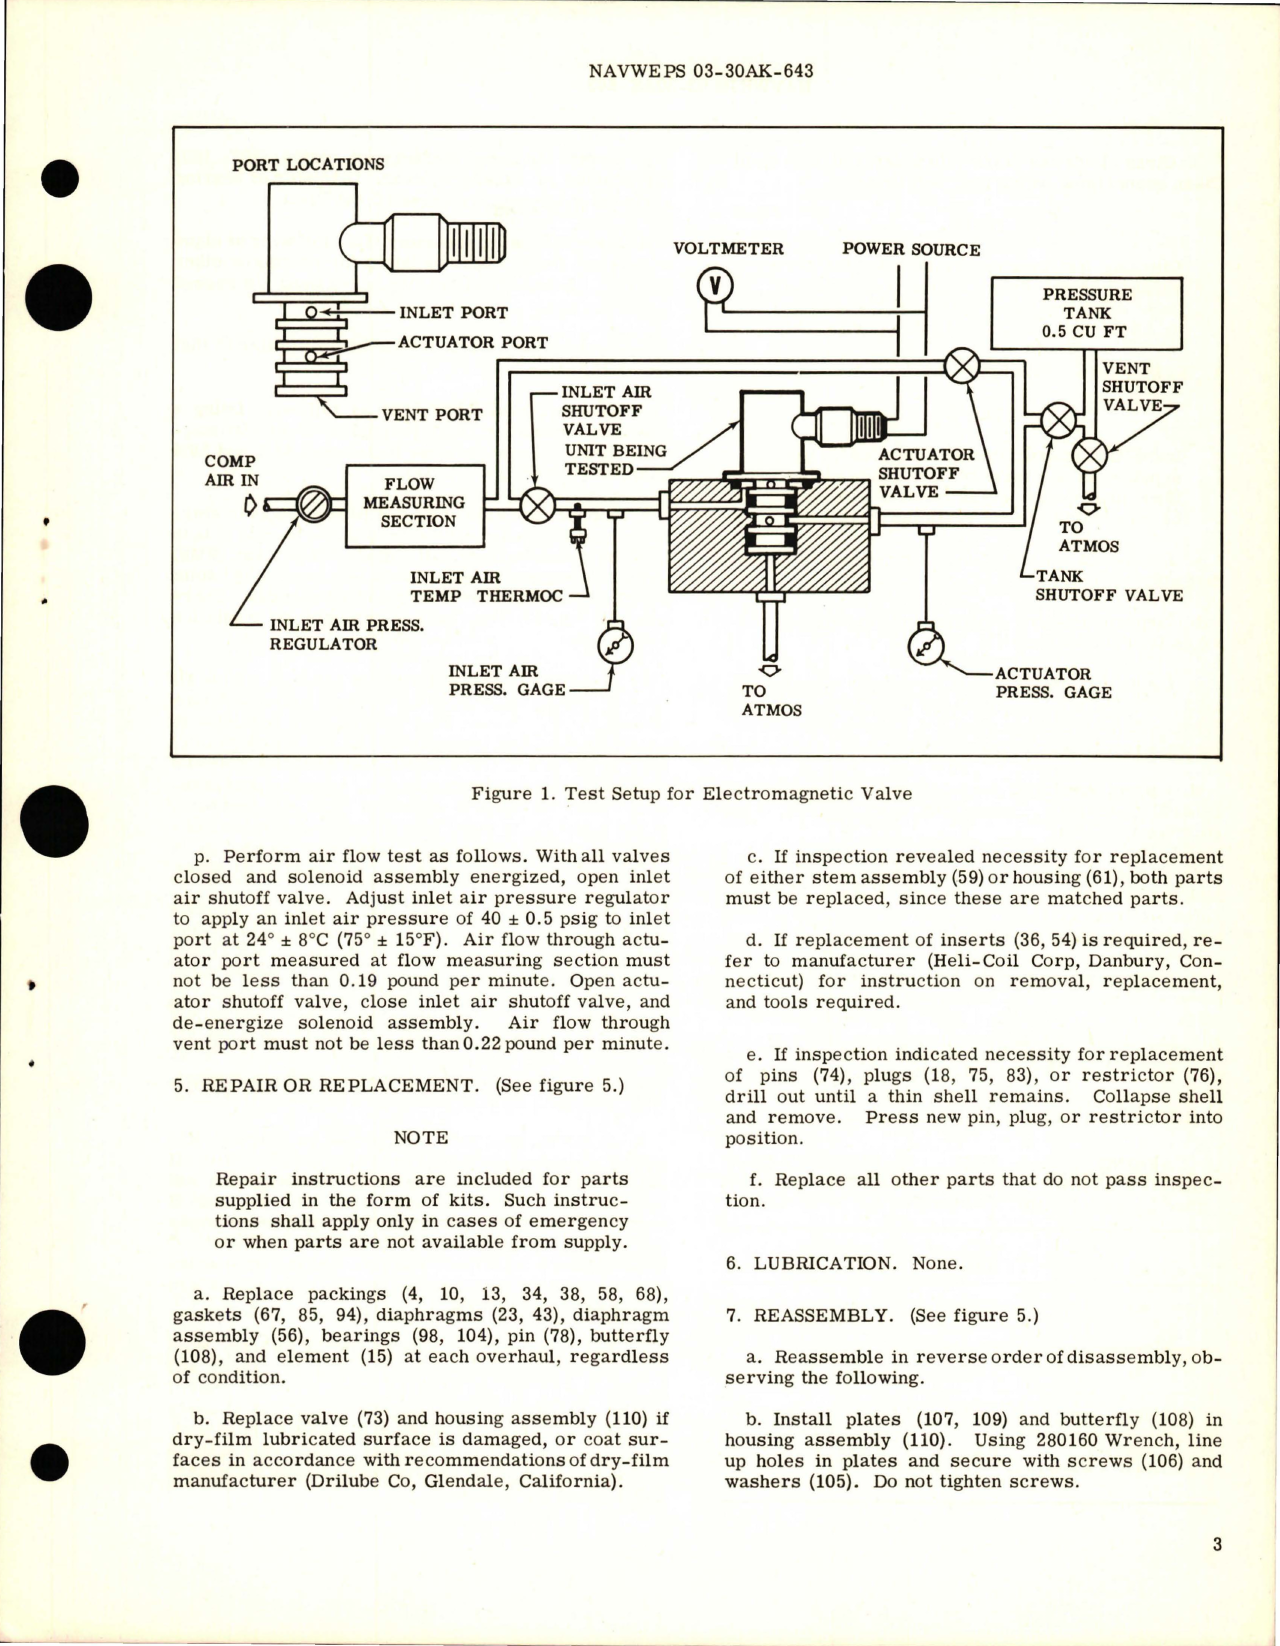 Sample page 5 from AirCorps Library document: Overhaul Instructions with Parts Breakdown for Pneumatic Air Pressure Regulator - 3 inch Diameter - Part 105460-320-2, SR 7